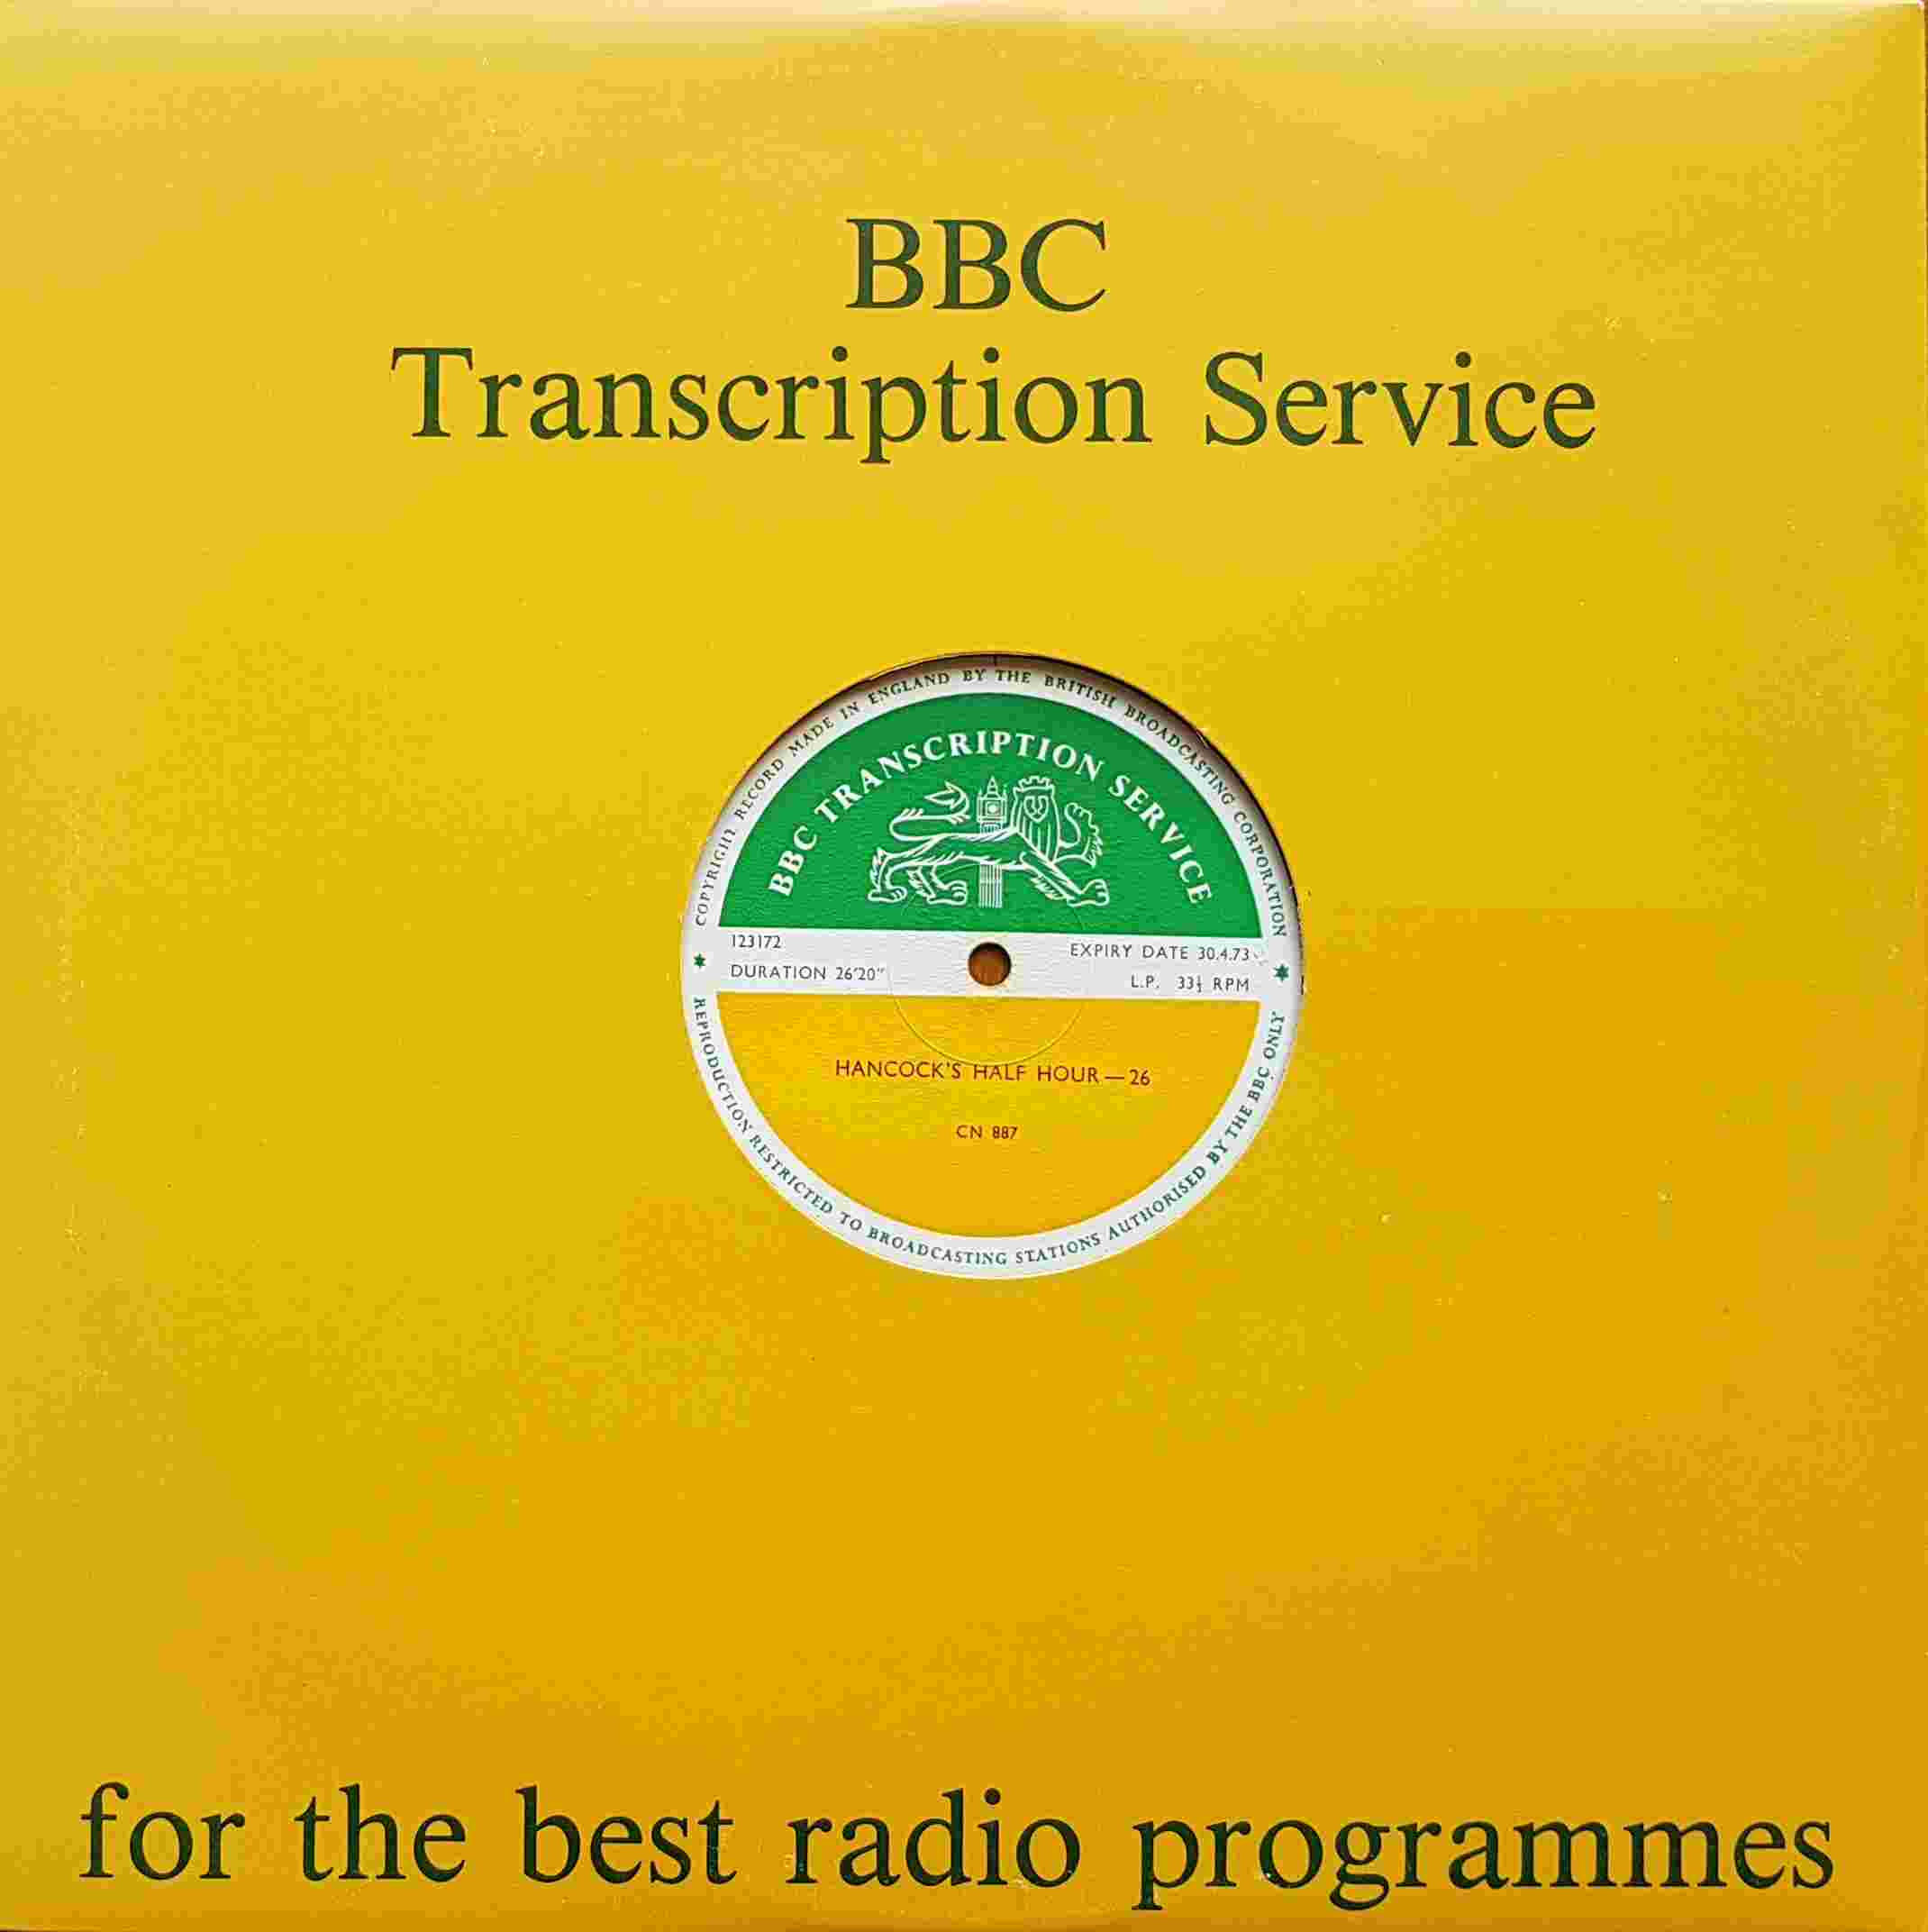 Picture of CN 887 13 Hancock's half hour - 25 & 26 by artist Tony Hancock from the BBC records and Tapes library